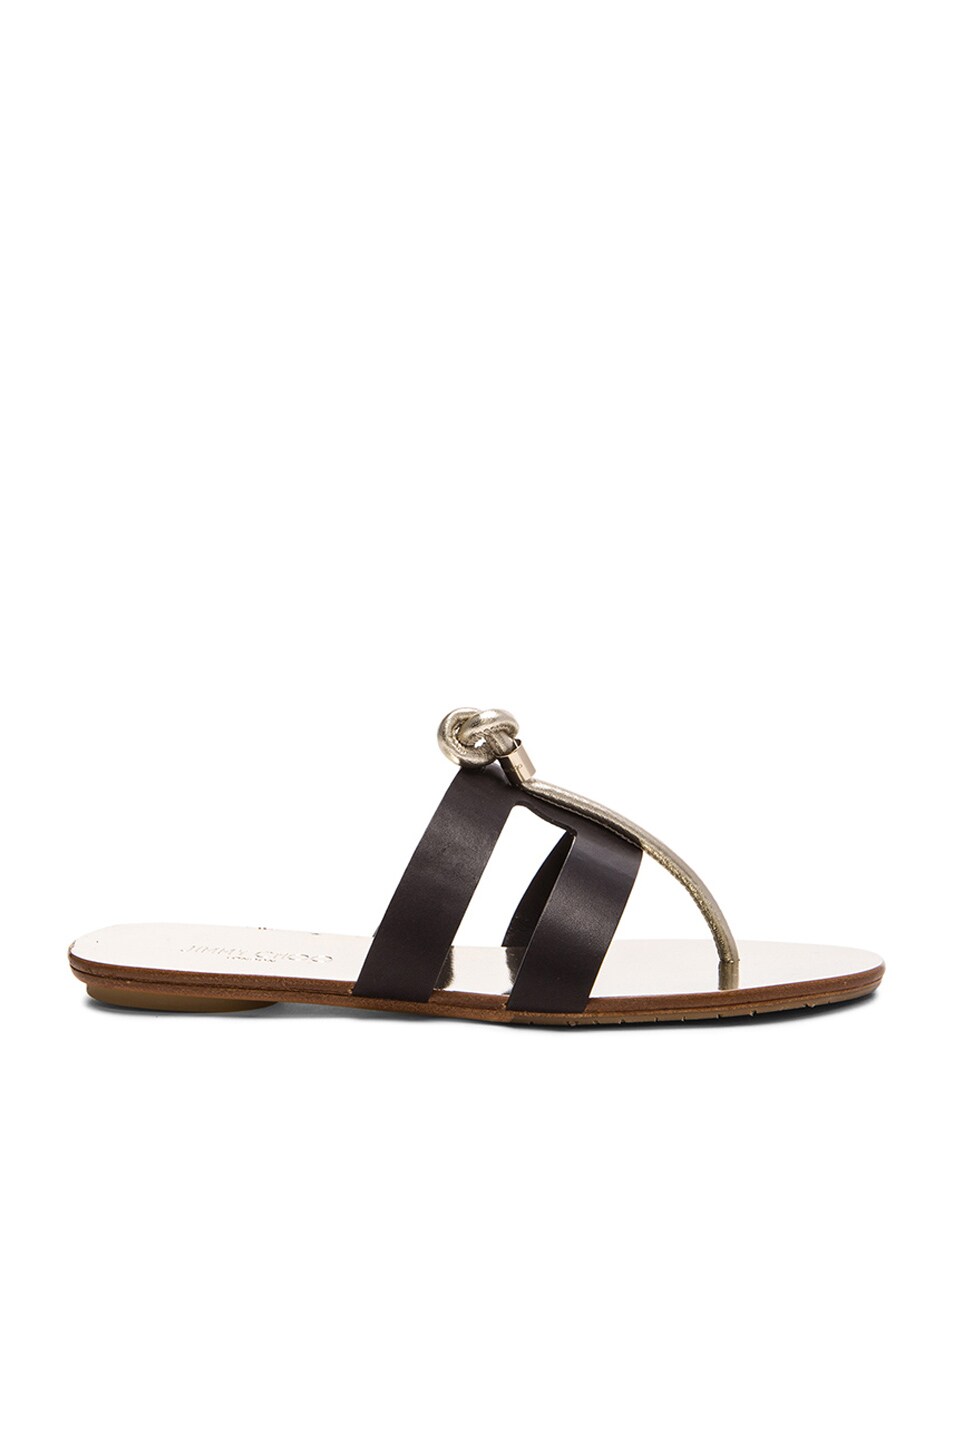 Image 1 of Jimmy Choo Naveen Leather Thong Sandals in Black & Light Gold